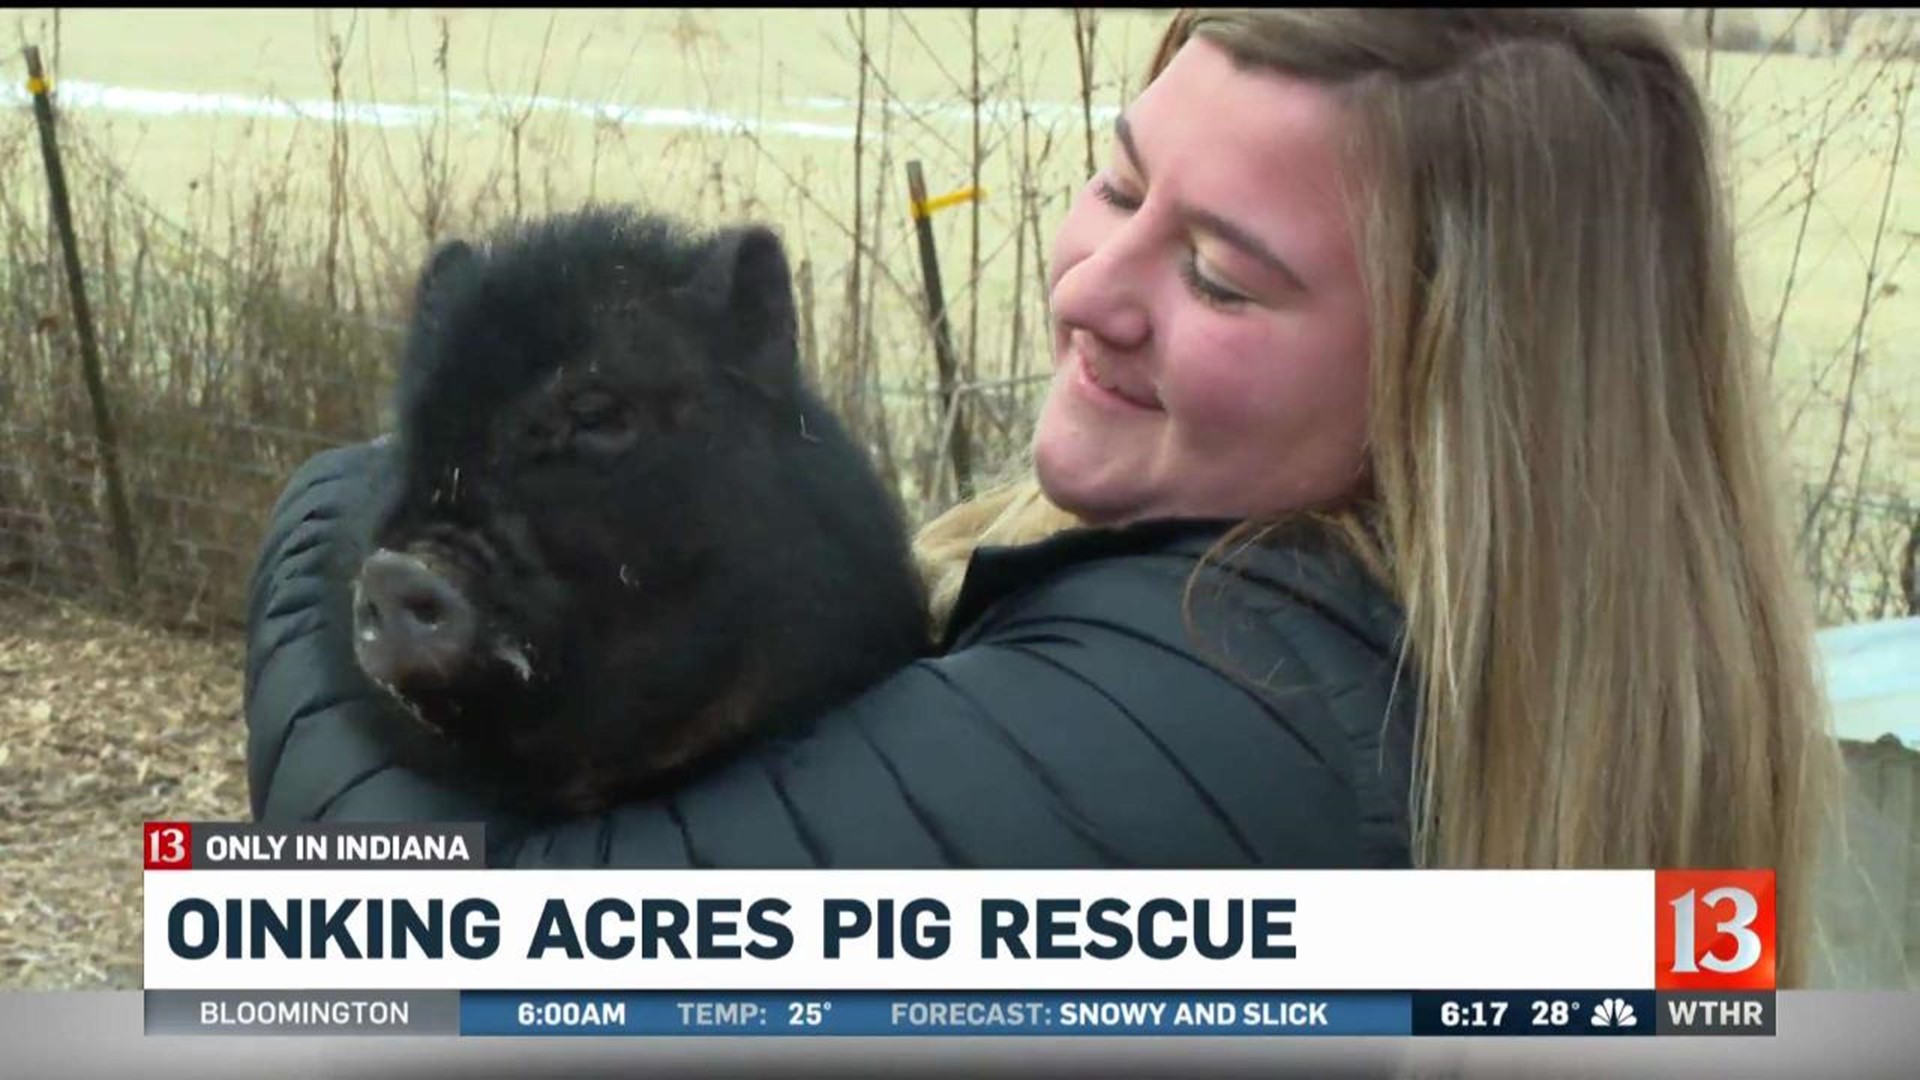 Oinking Acres Pig Rescue